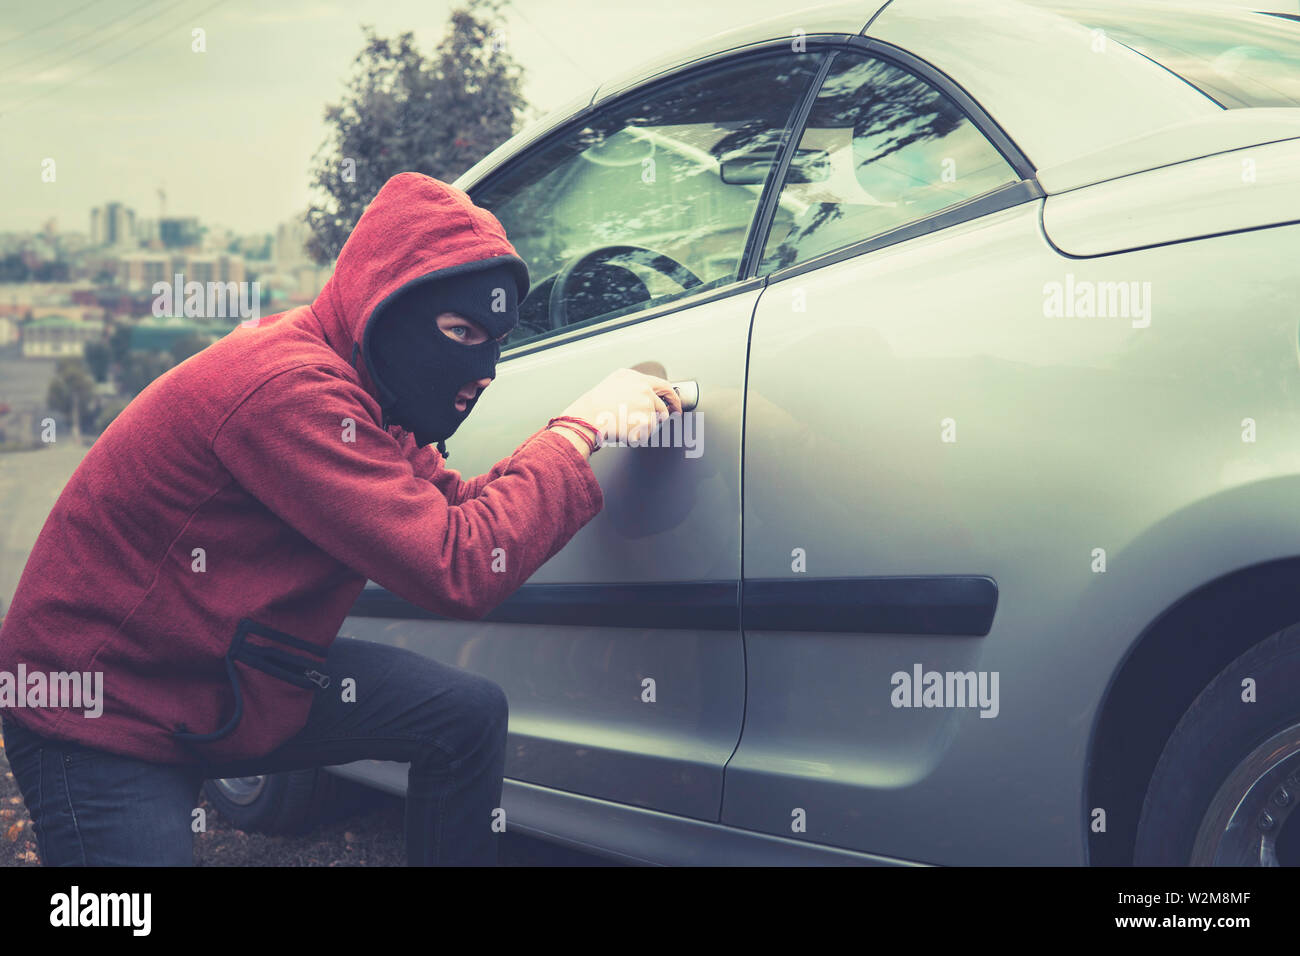 Masked man in casual wear furtively picks the car lock on a city background. Male thief stealthily picklocks the vehicle door. Stealer cautiously Stock Photo